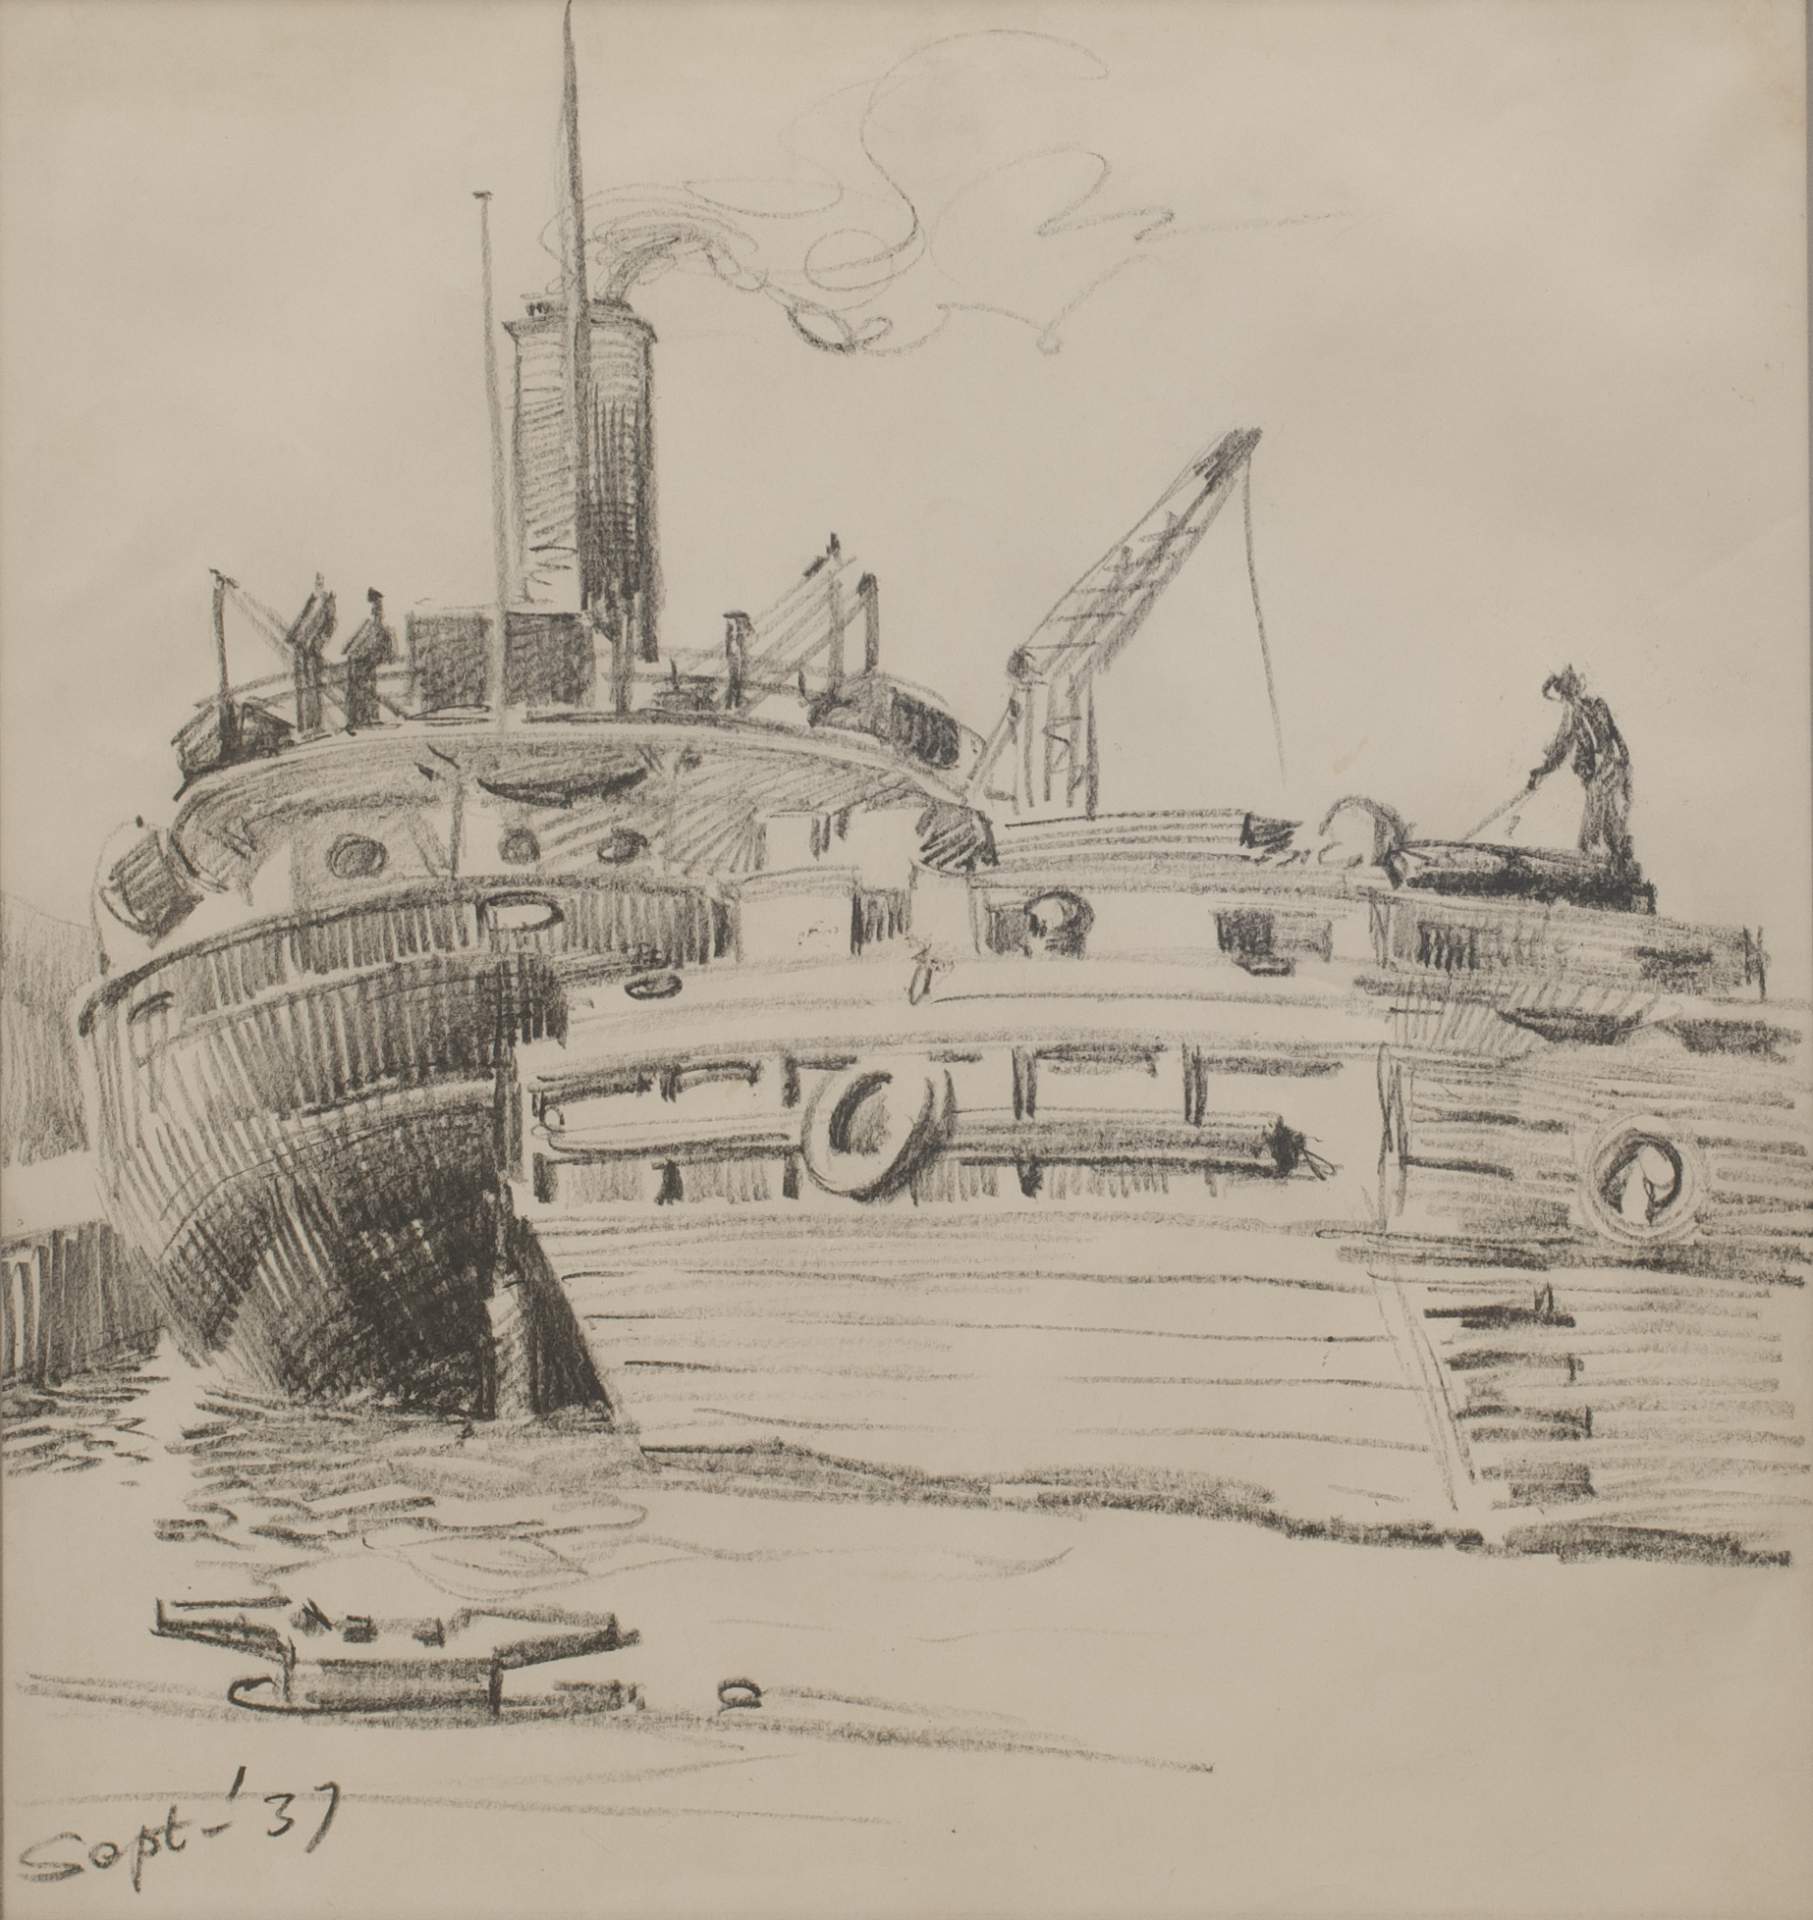 Untitled (Barge and Laker)